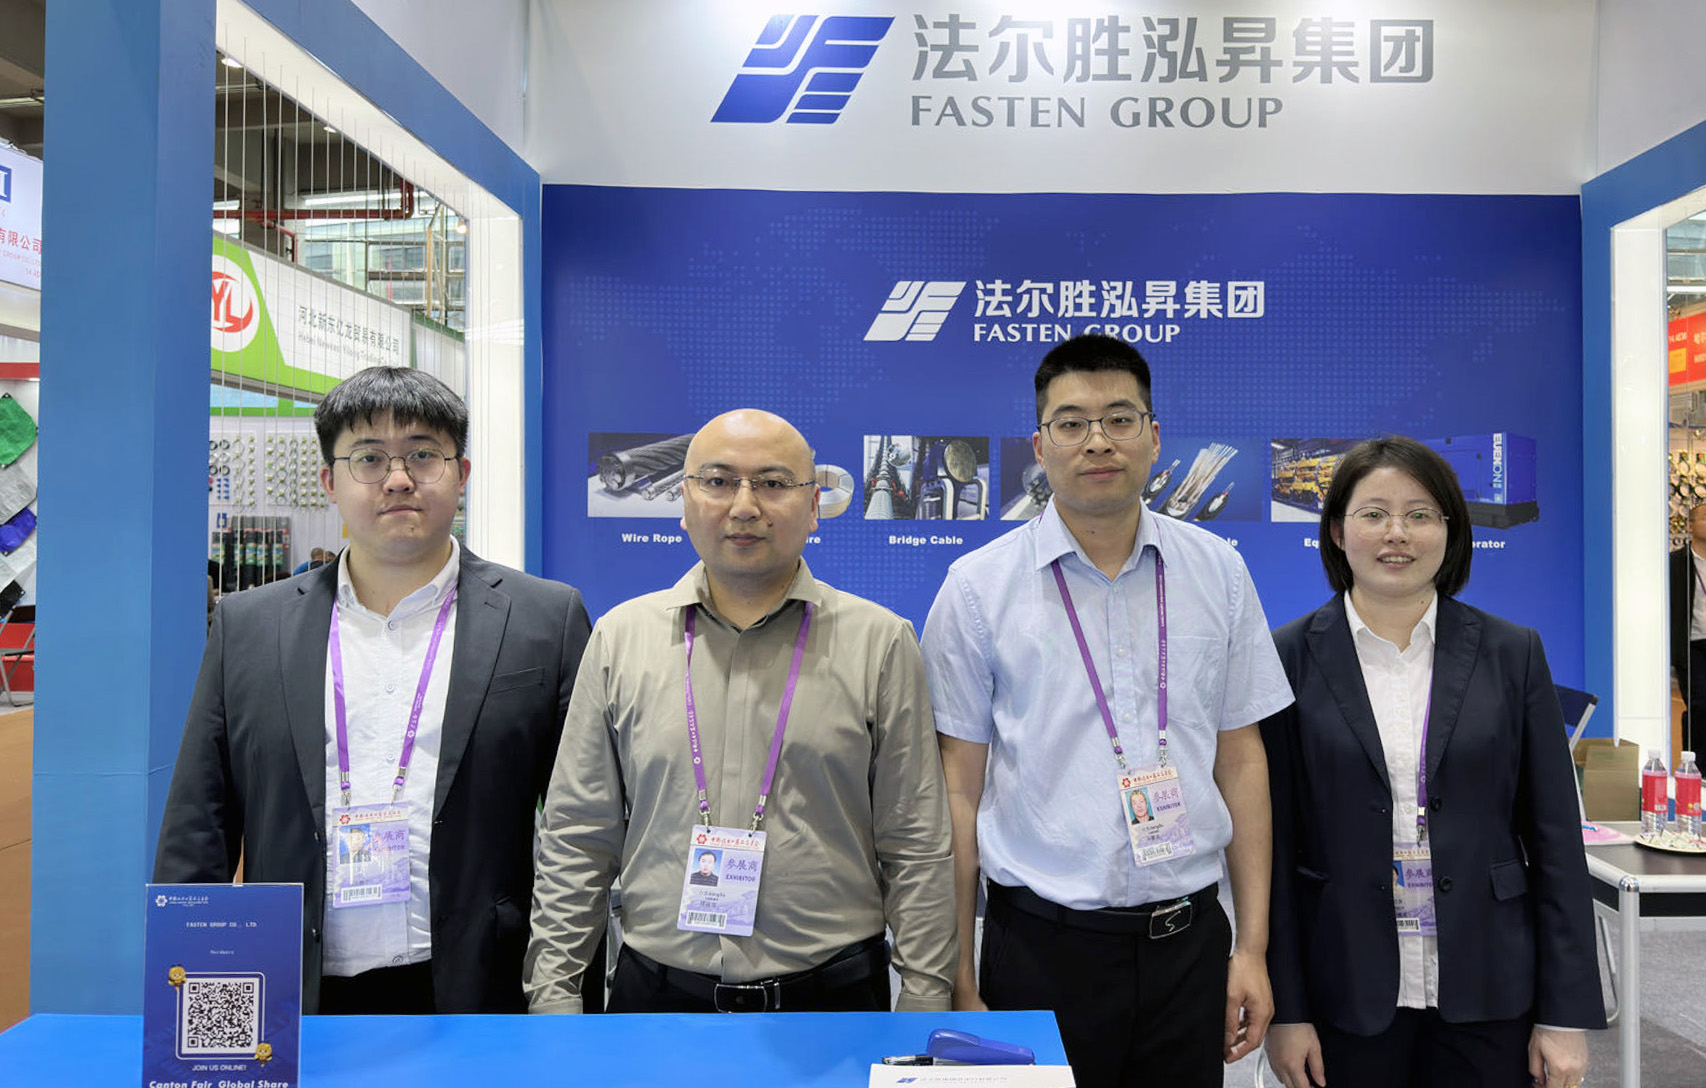 Fasten Group attended the 133rd Canton Fair